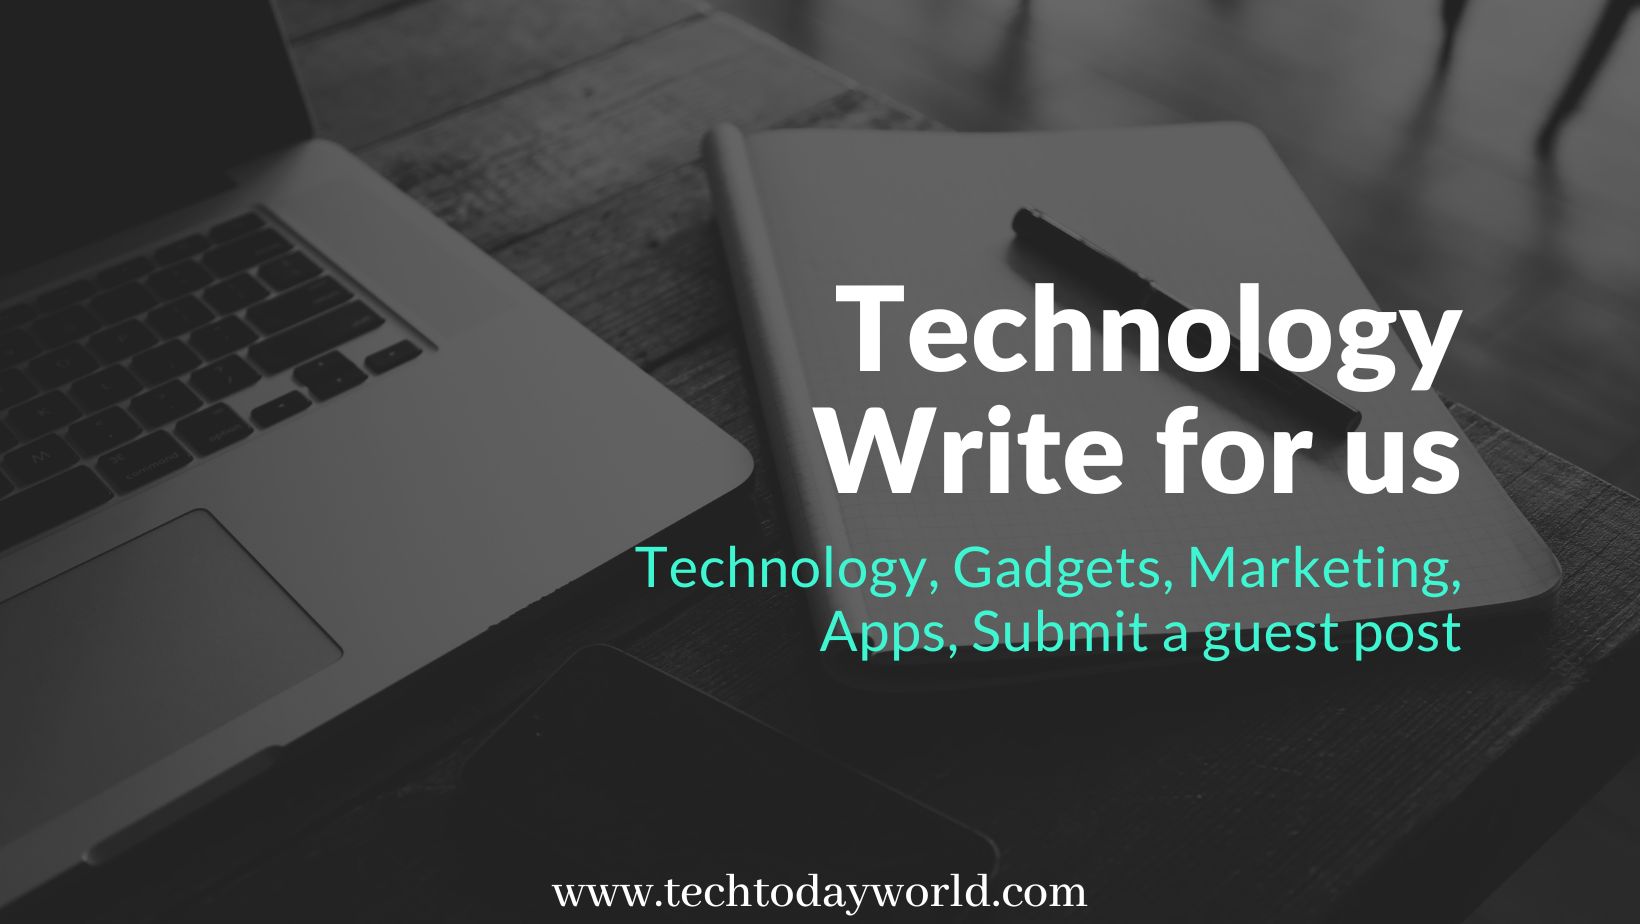 Tech Today World – Technology write for us